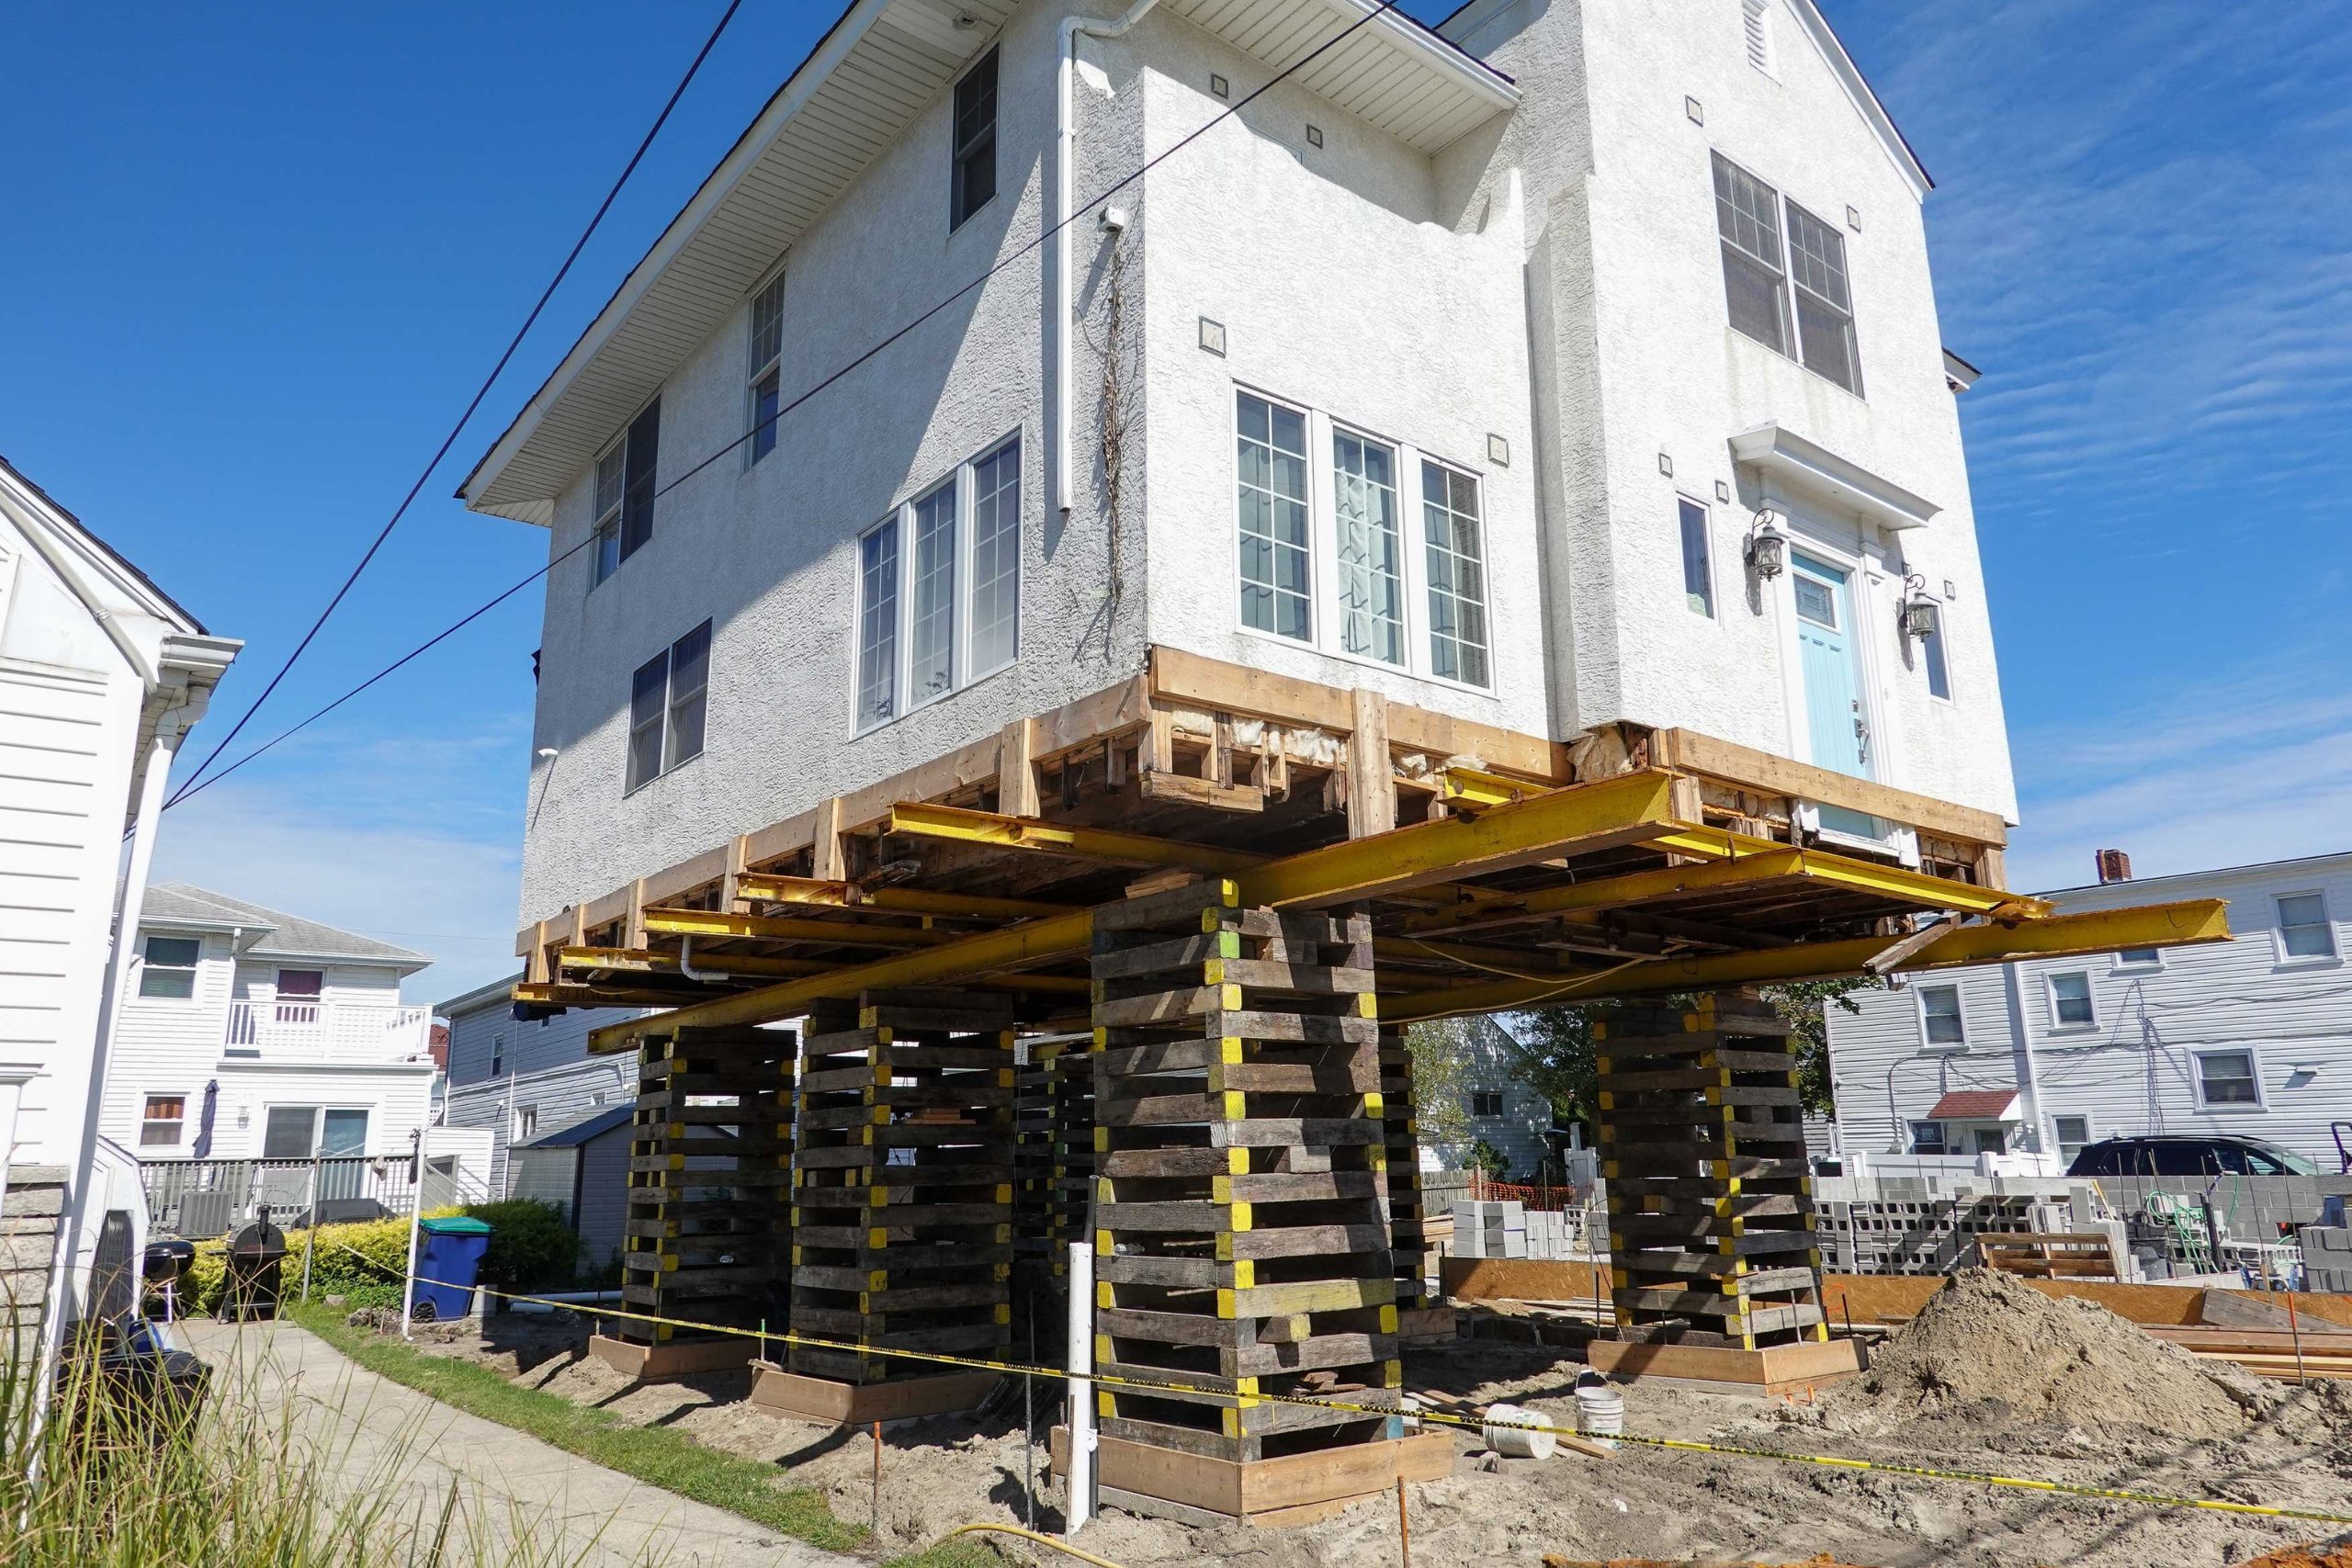 Located in Santa Cruz, California, we are a company that specializes in house lifting, small distance house moving, piles and foundations.